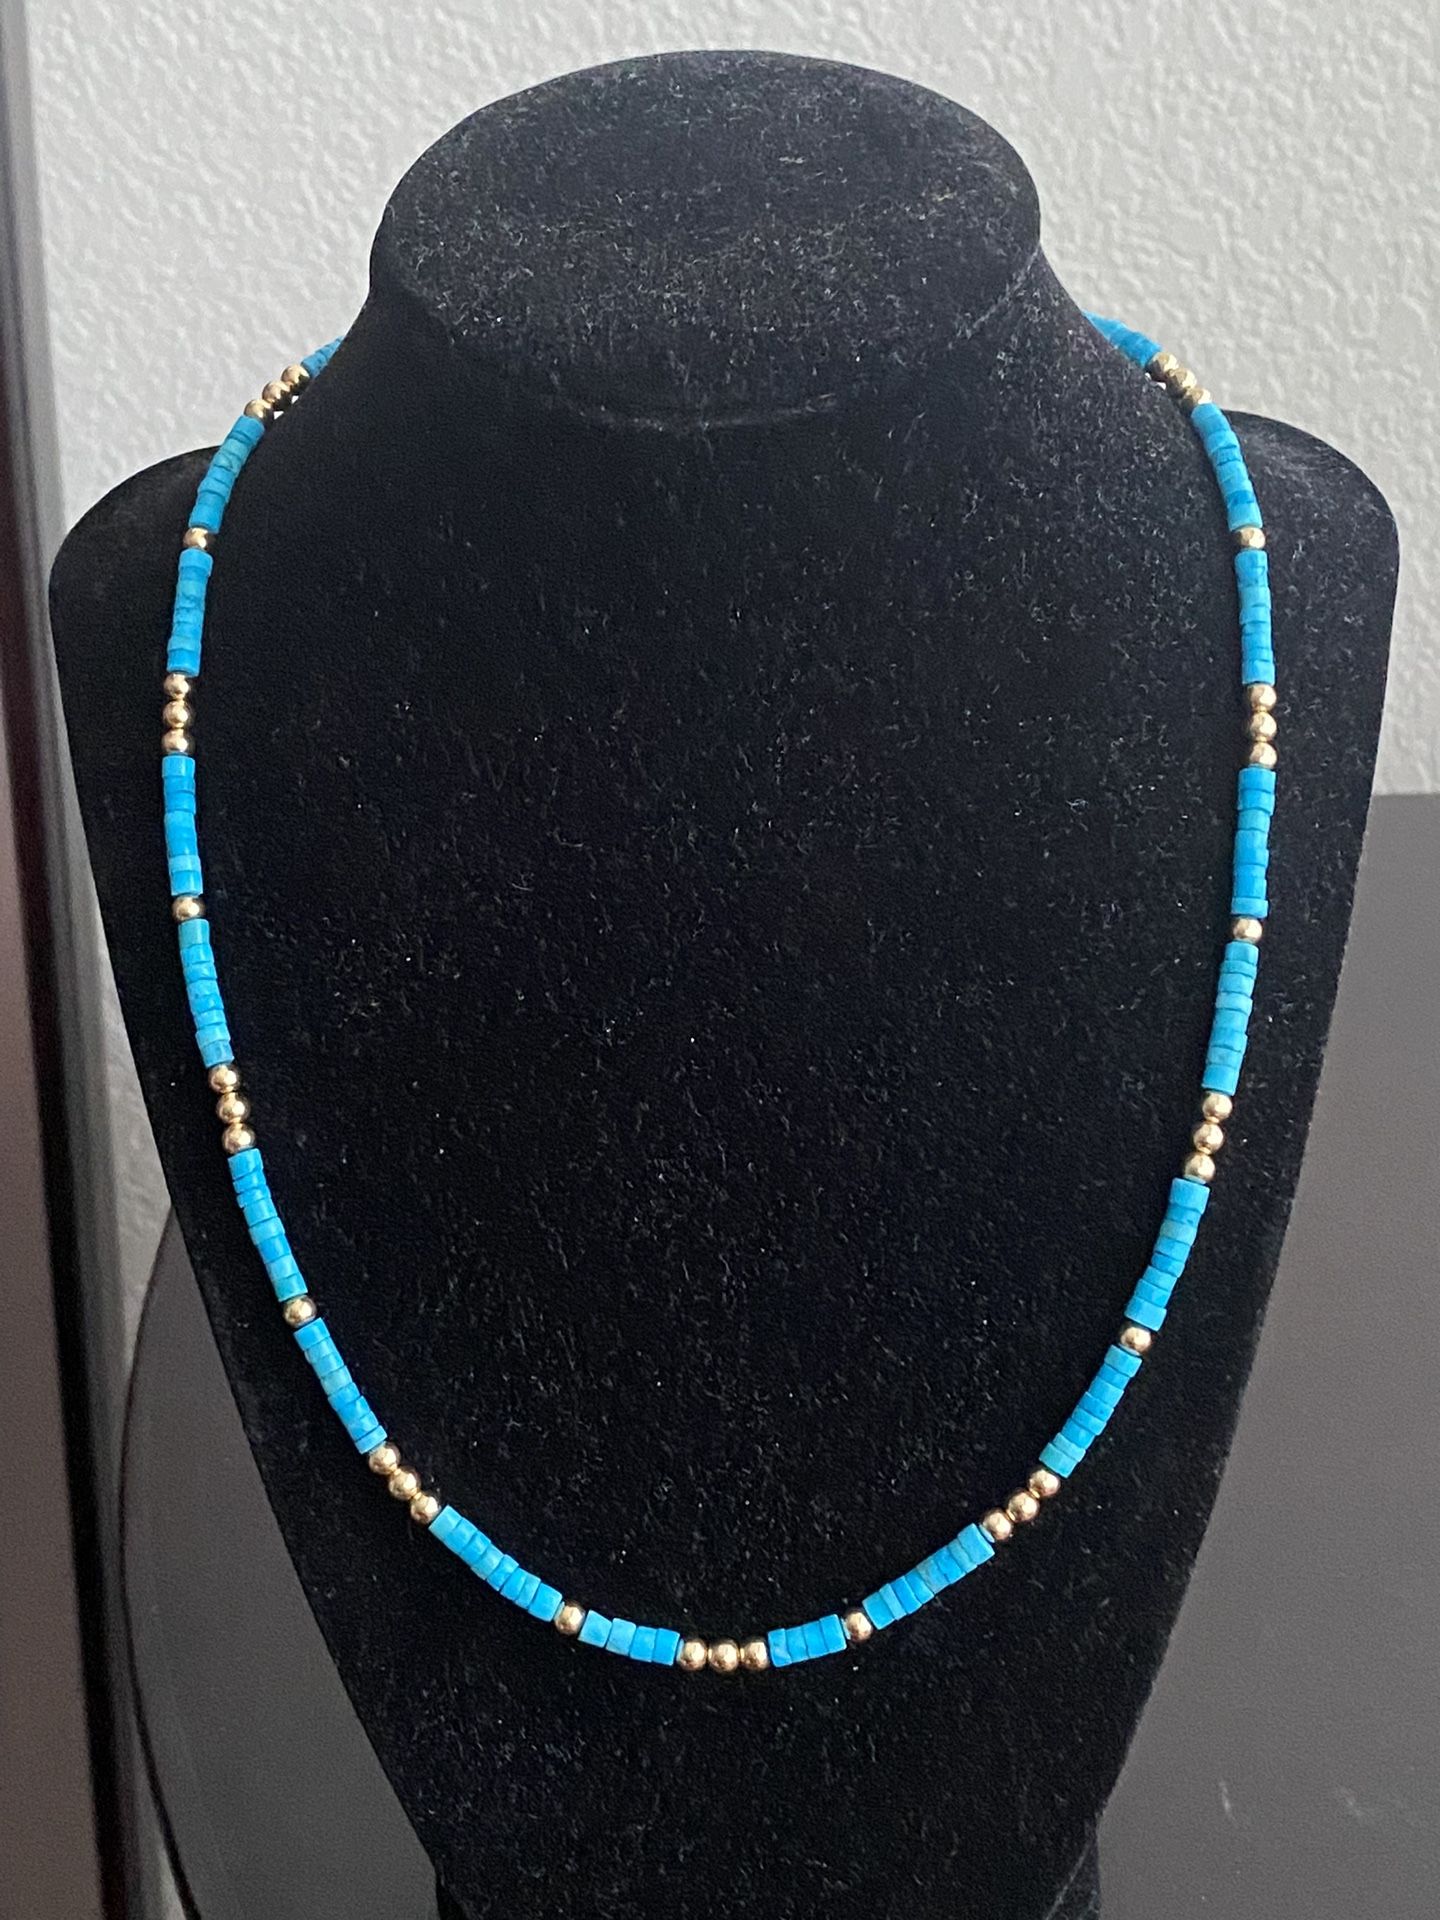 Genuine Natural Turquoise Necklace with 14K Gold Filled Beads